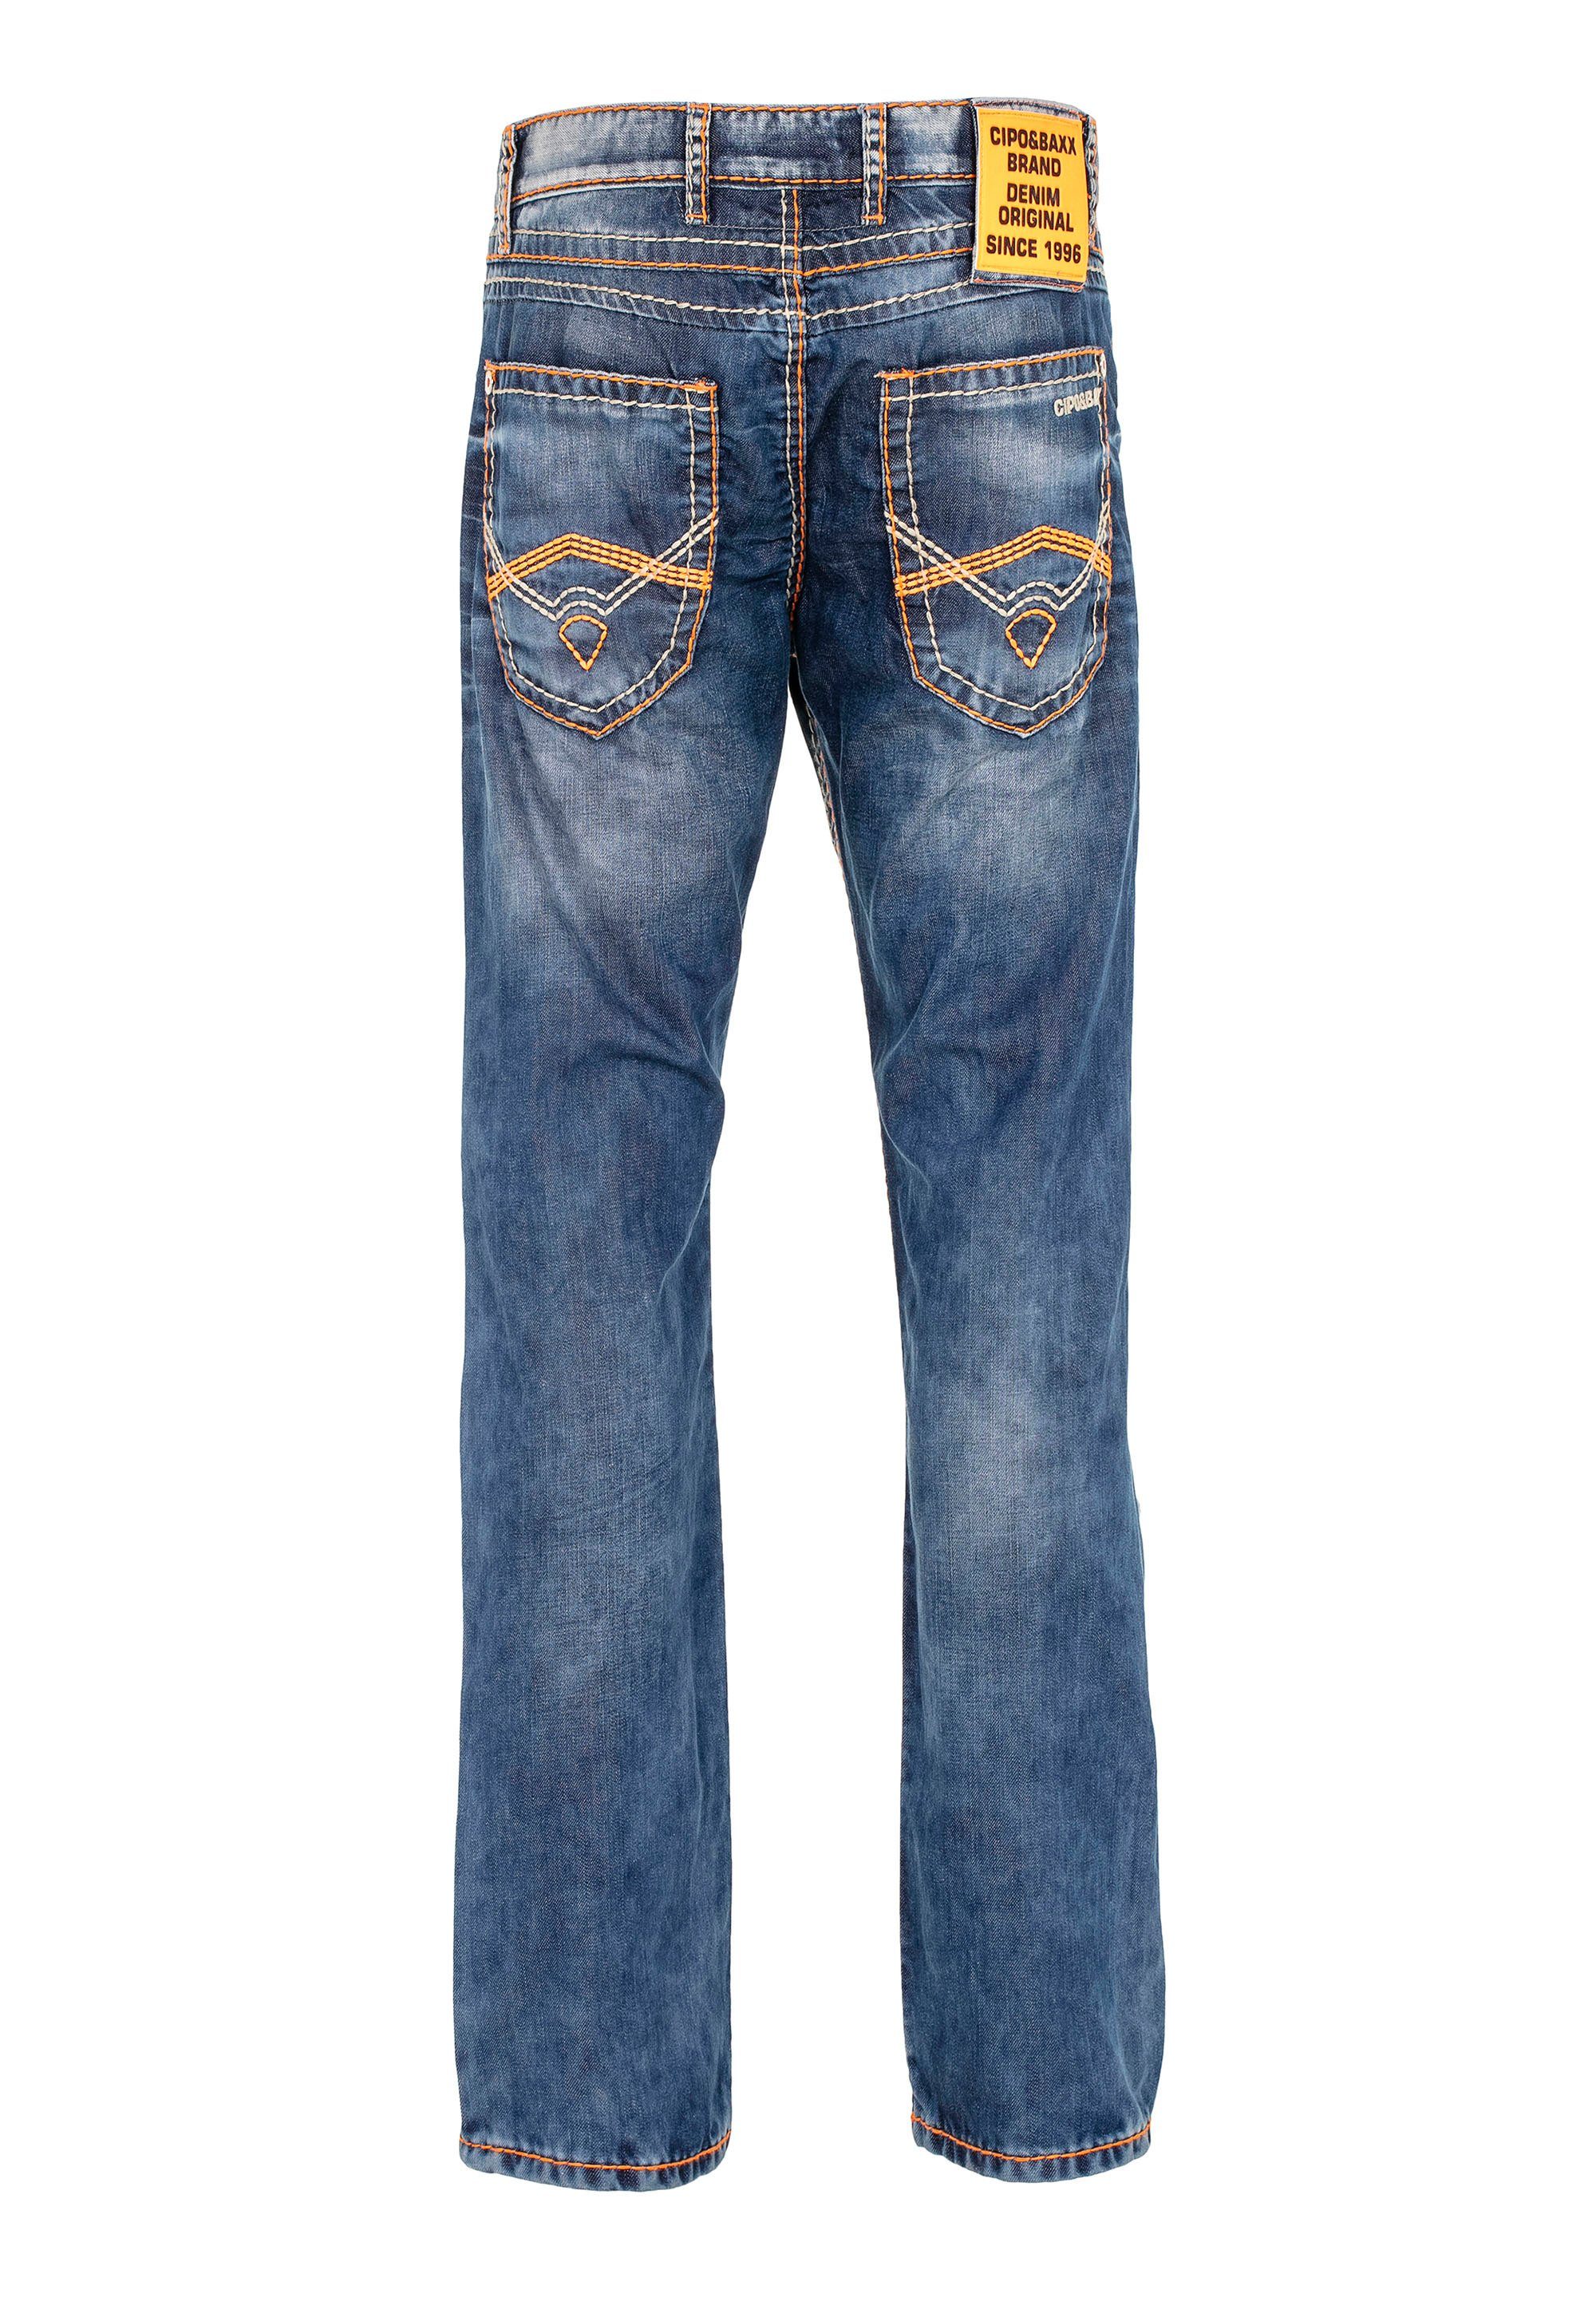 Jeans Baxx im Destroyed-Look & Cipo Bequeme